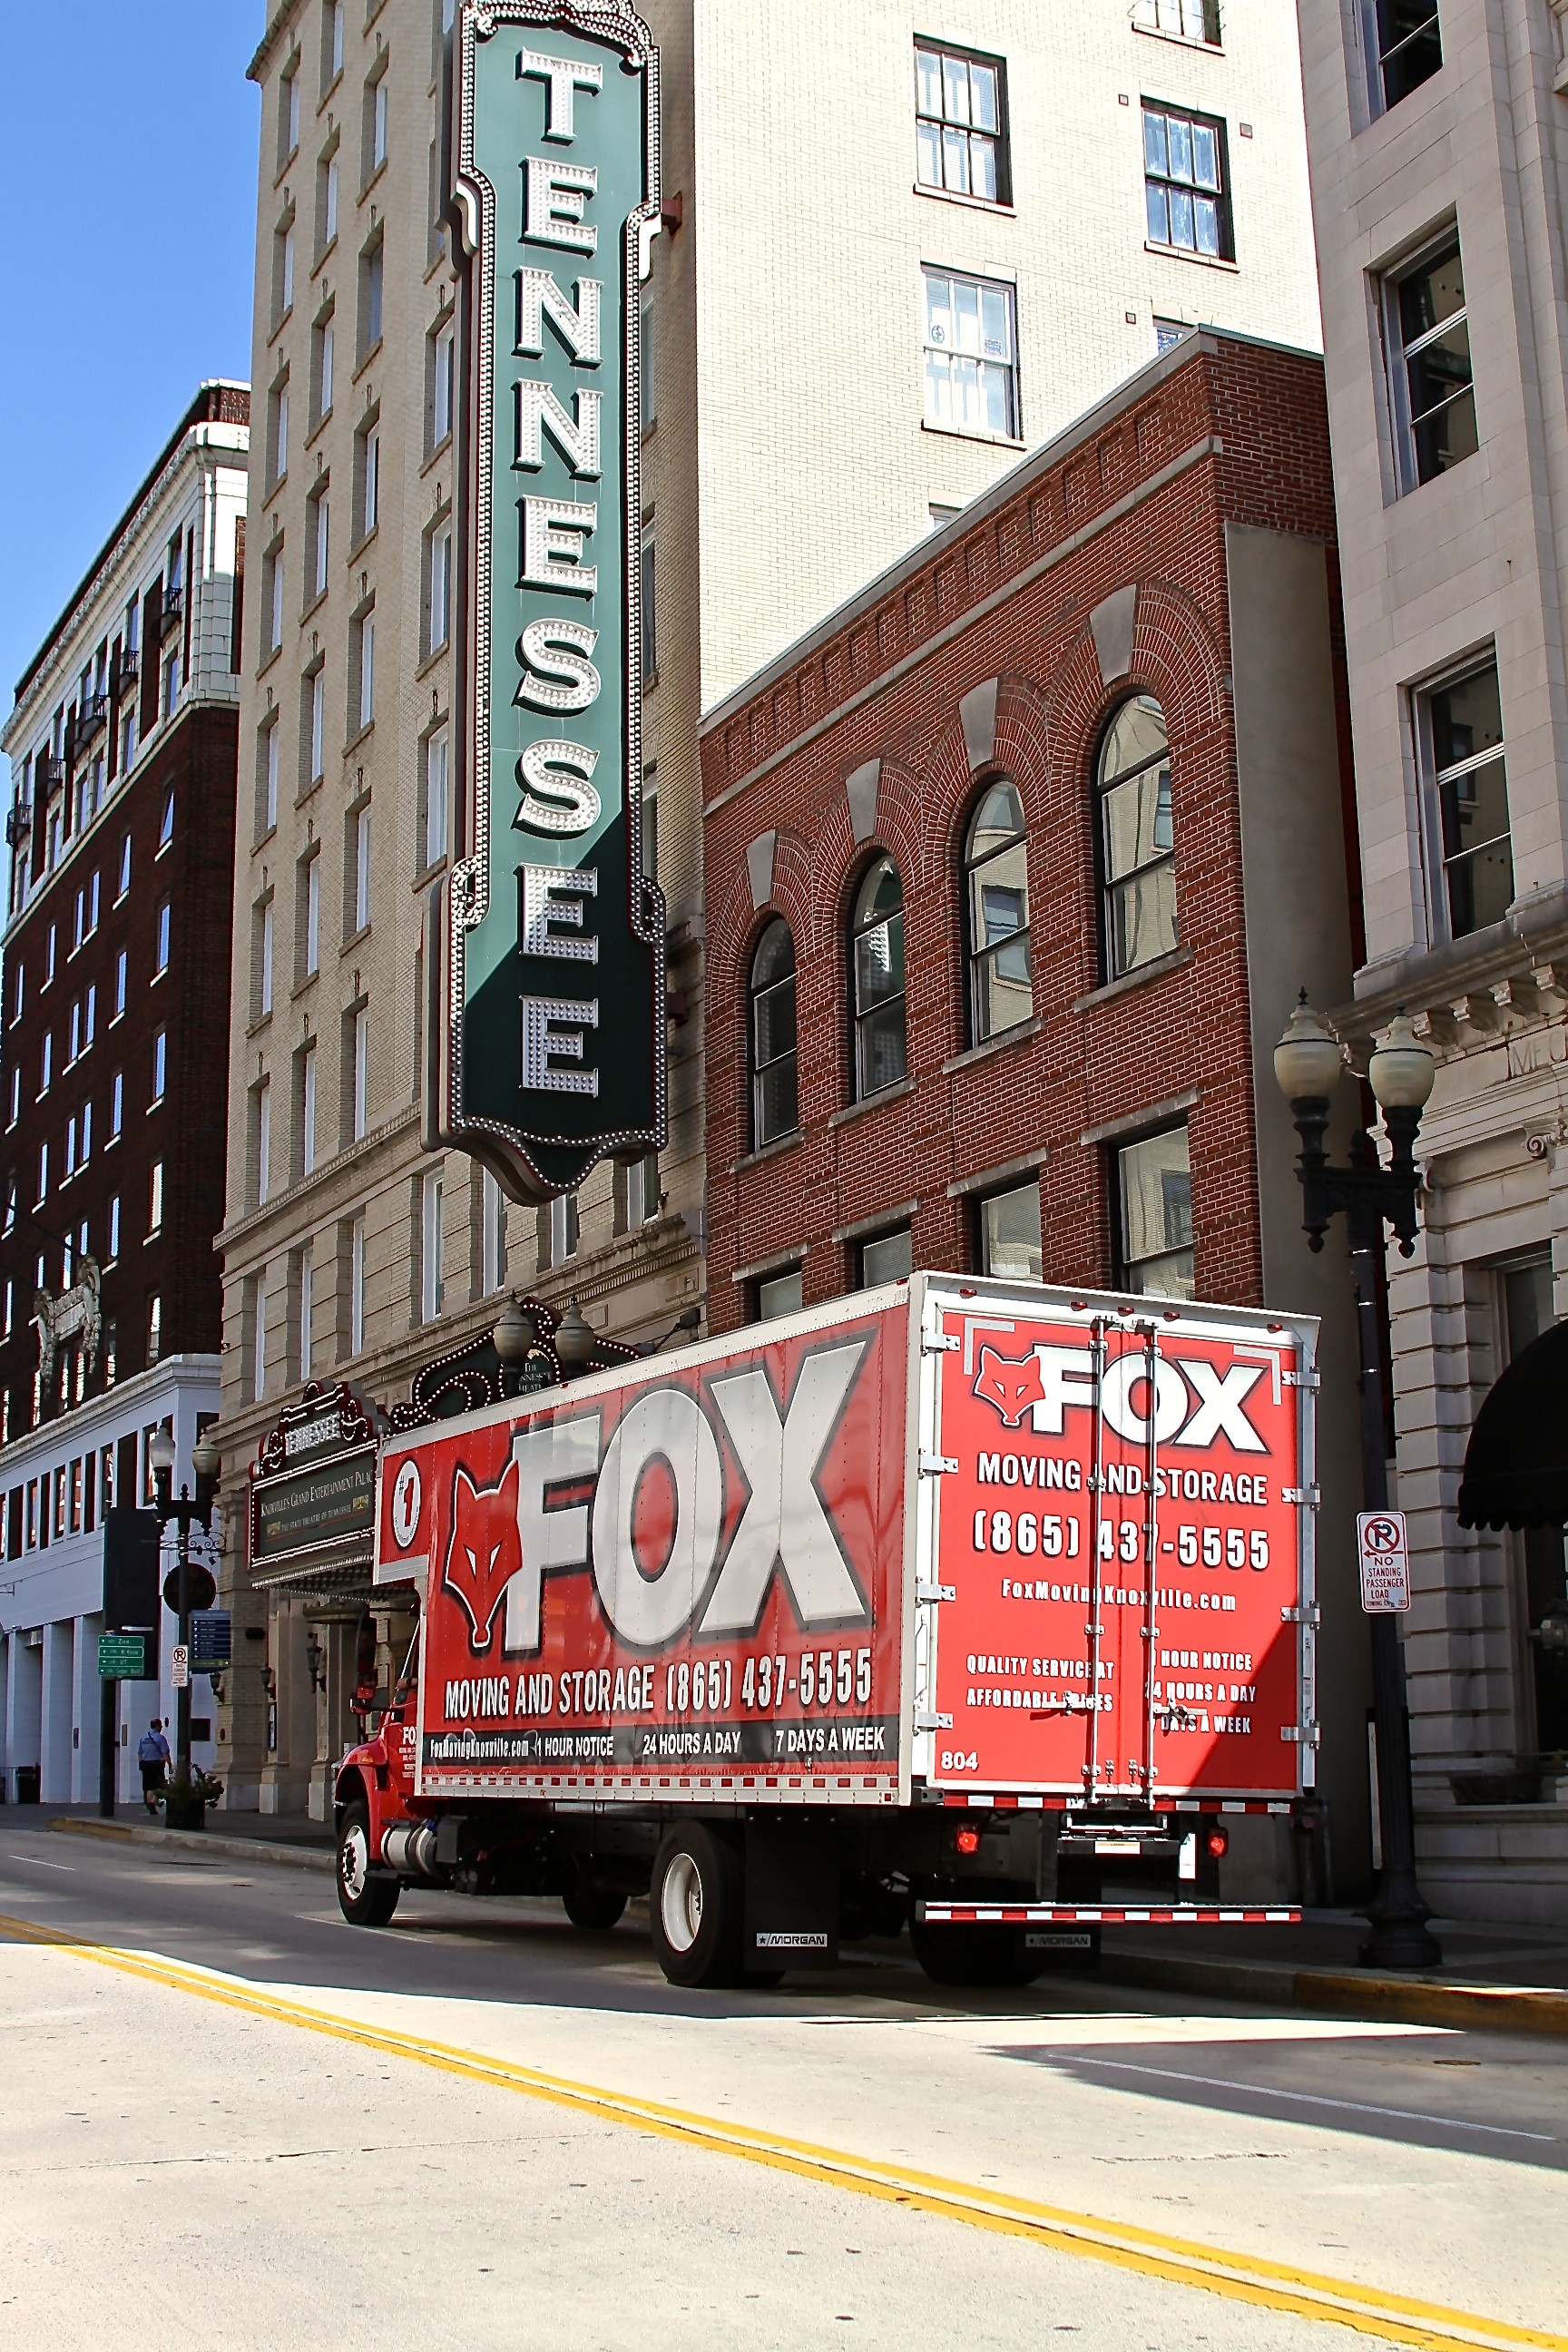 Fox Moving And Storage East Tennessee Linkedin